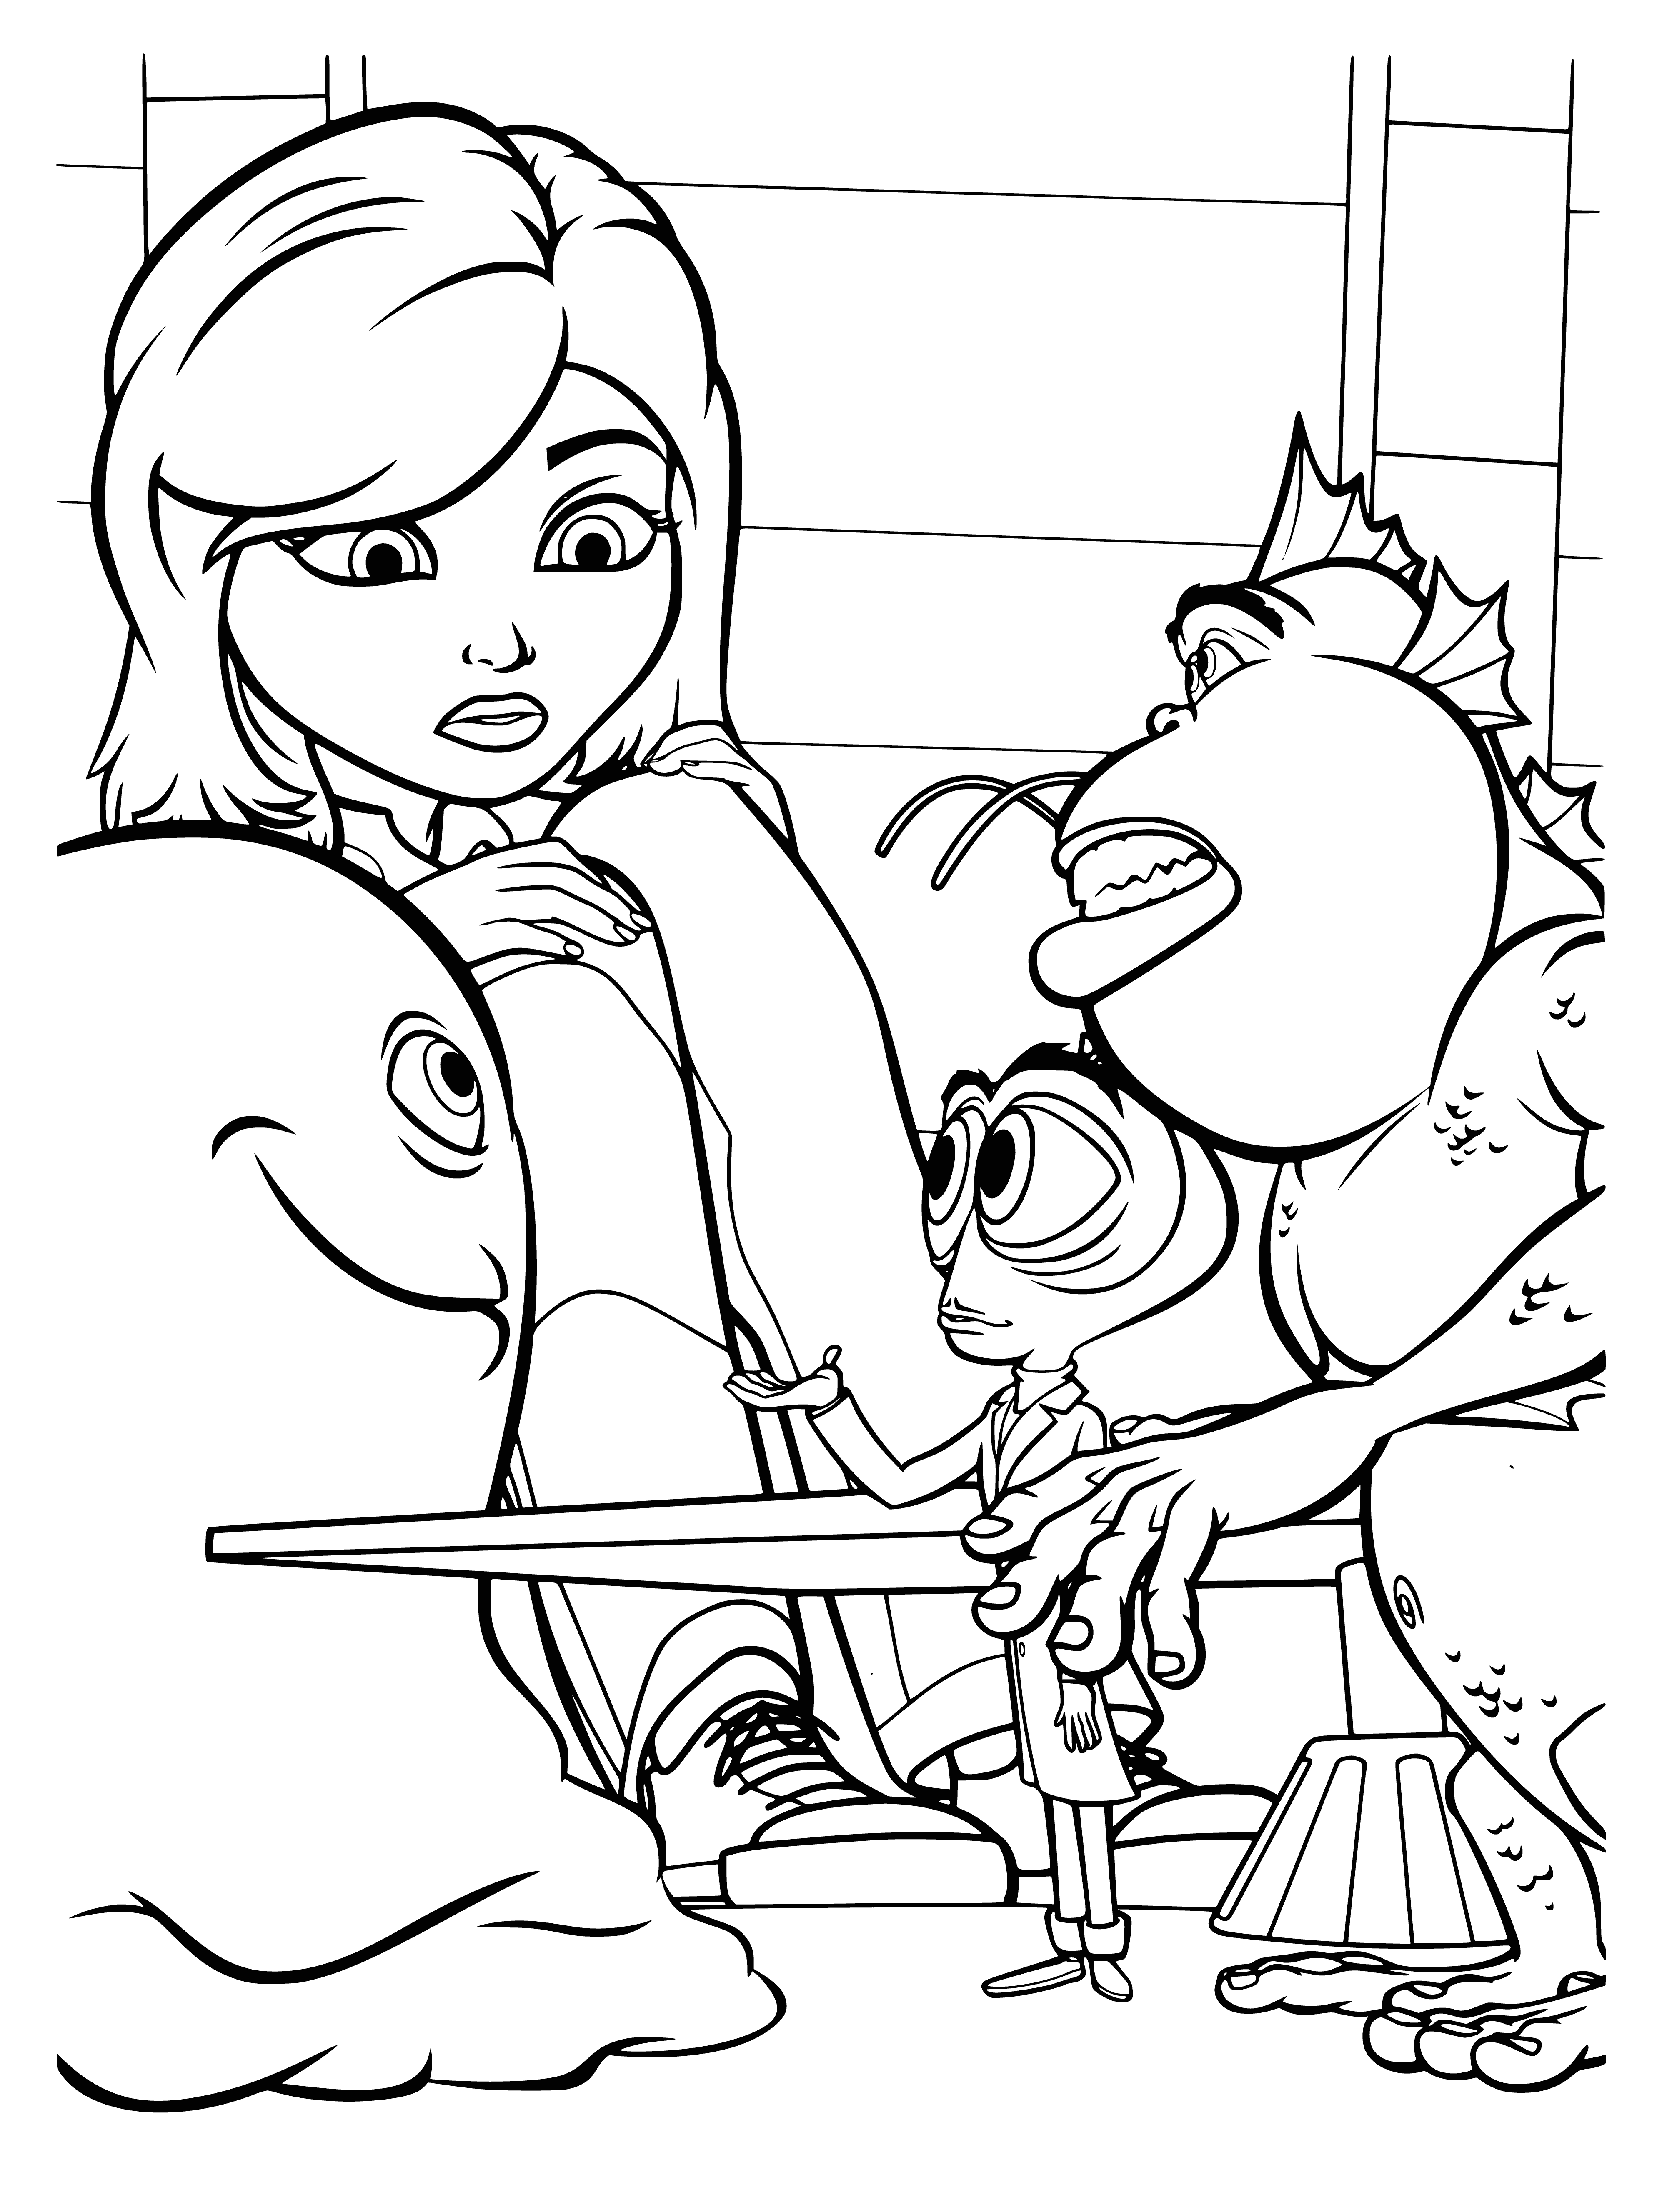 Monsters coloring page